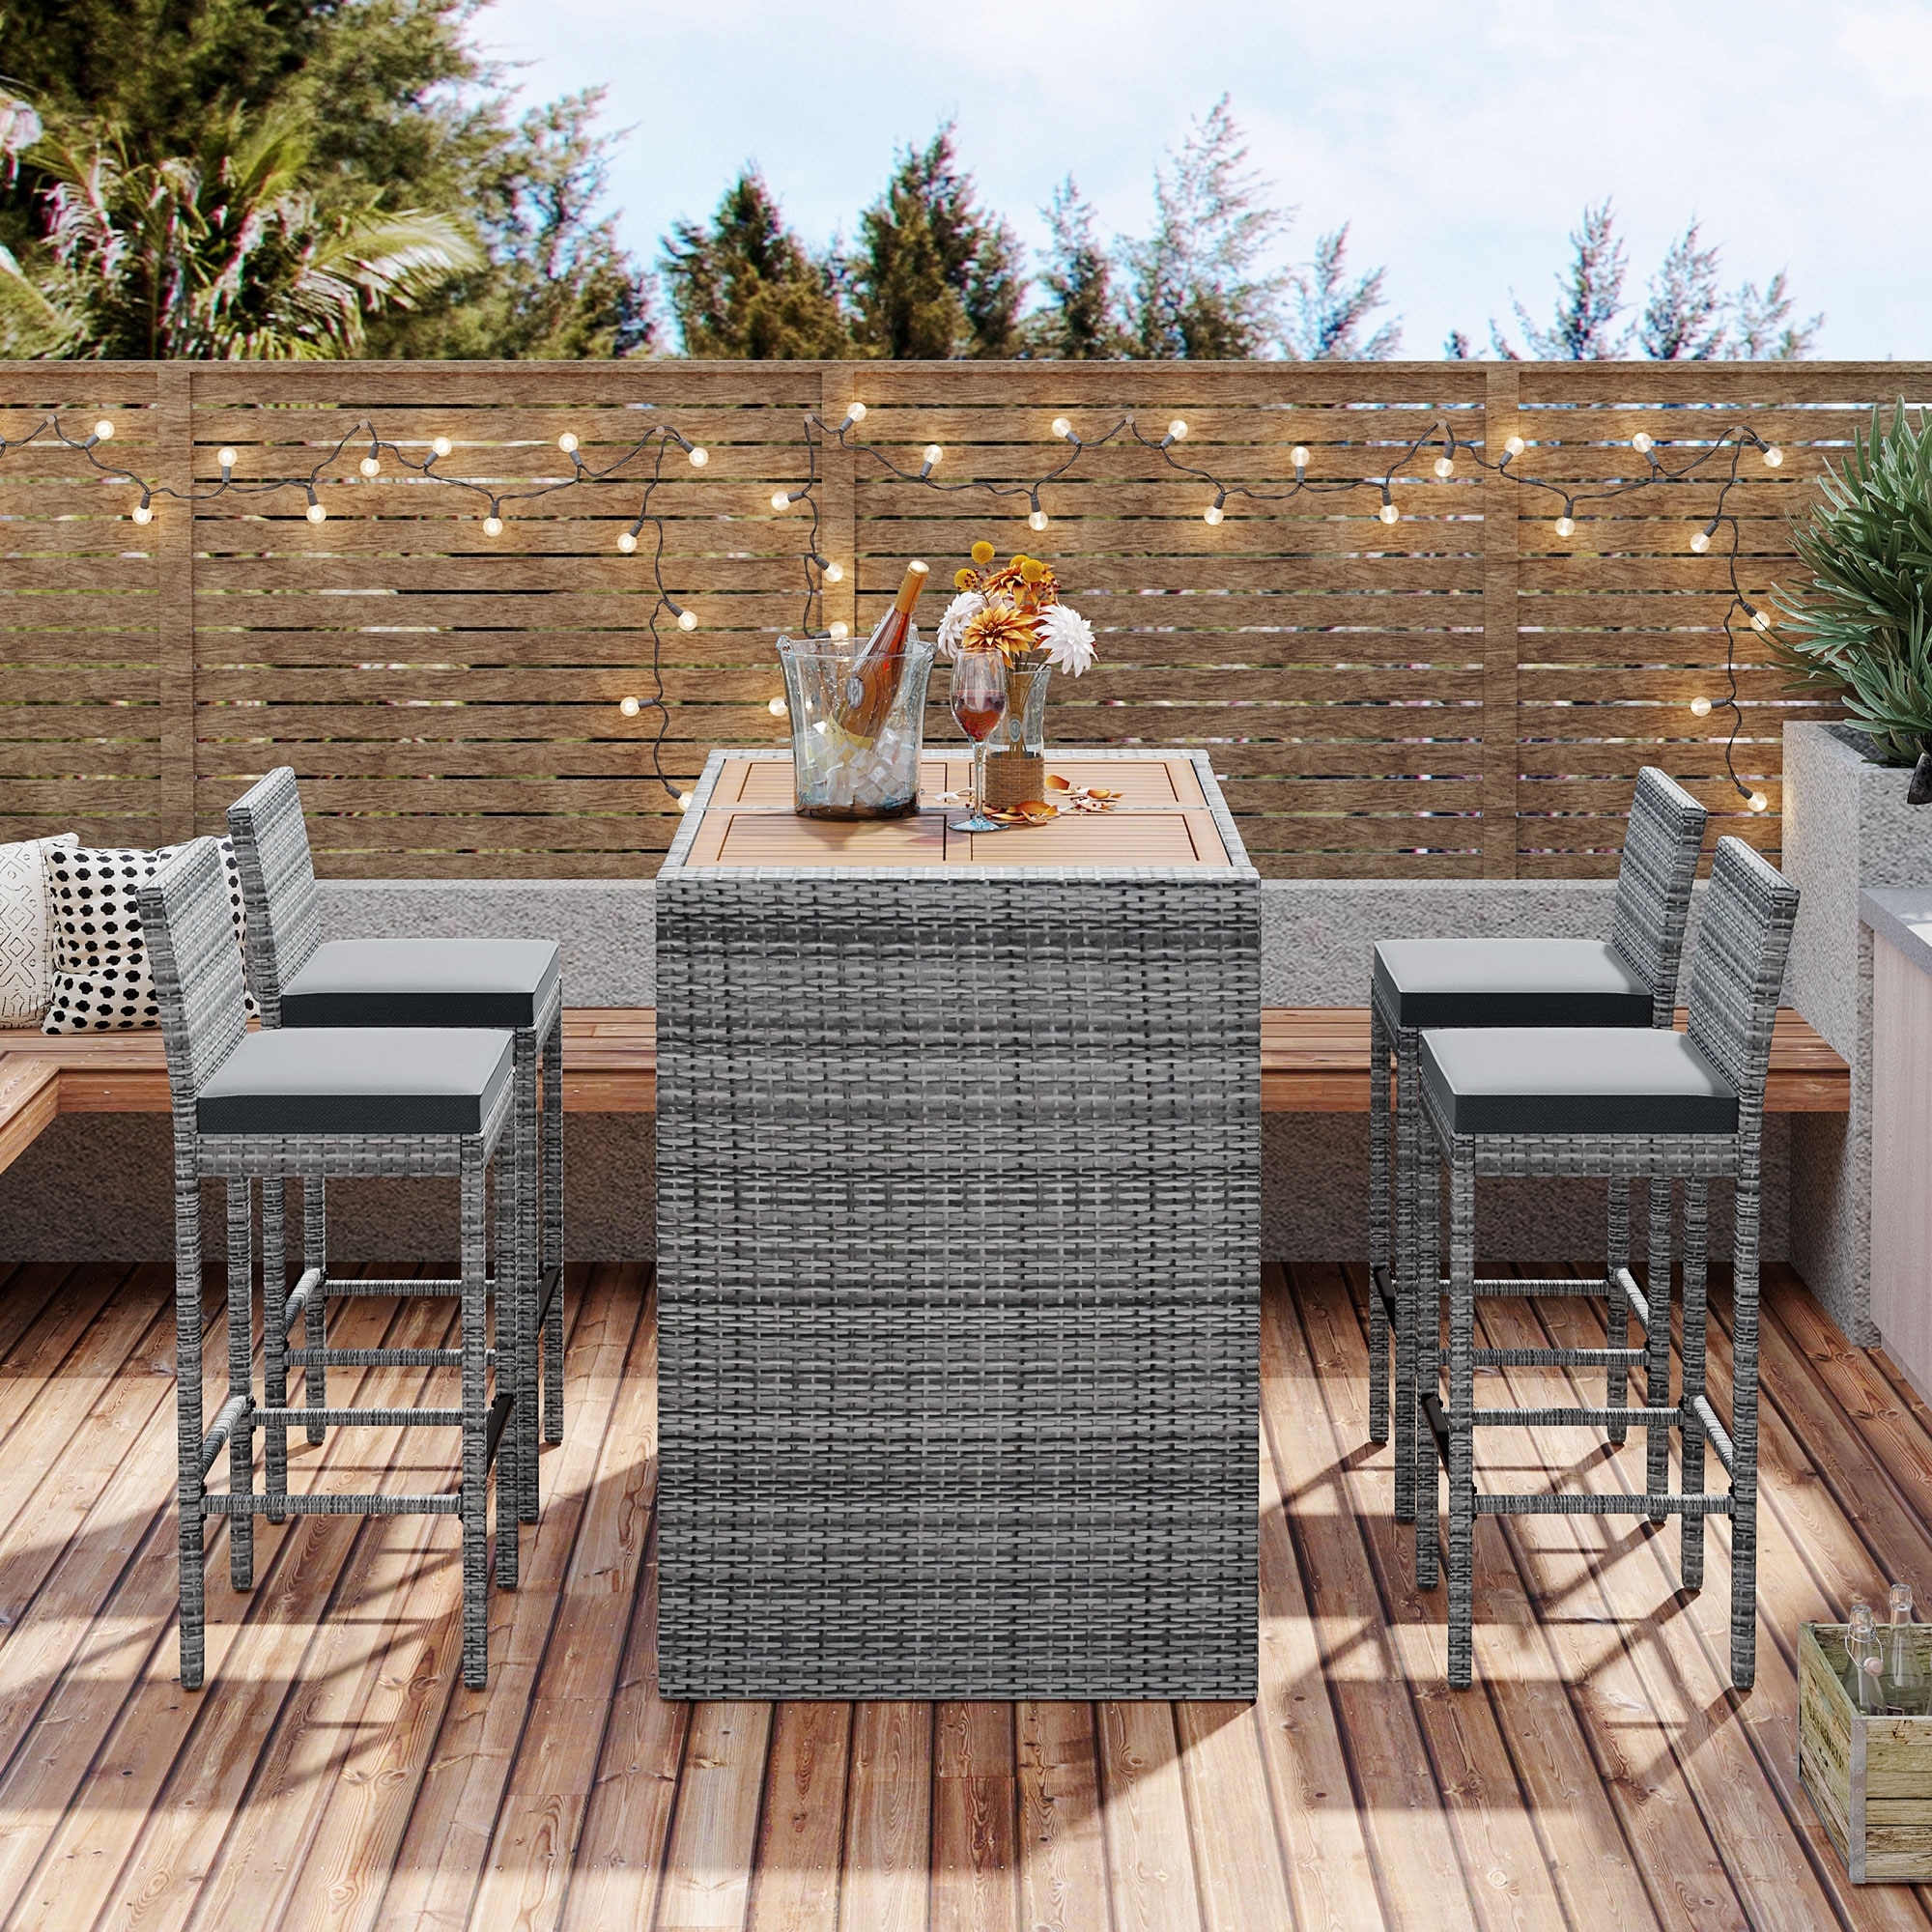 5 Pcs Outdoor Wicker Bar Set Bar Dining Set With Height Chairs and Acacia Wood Table Top gray